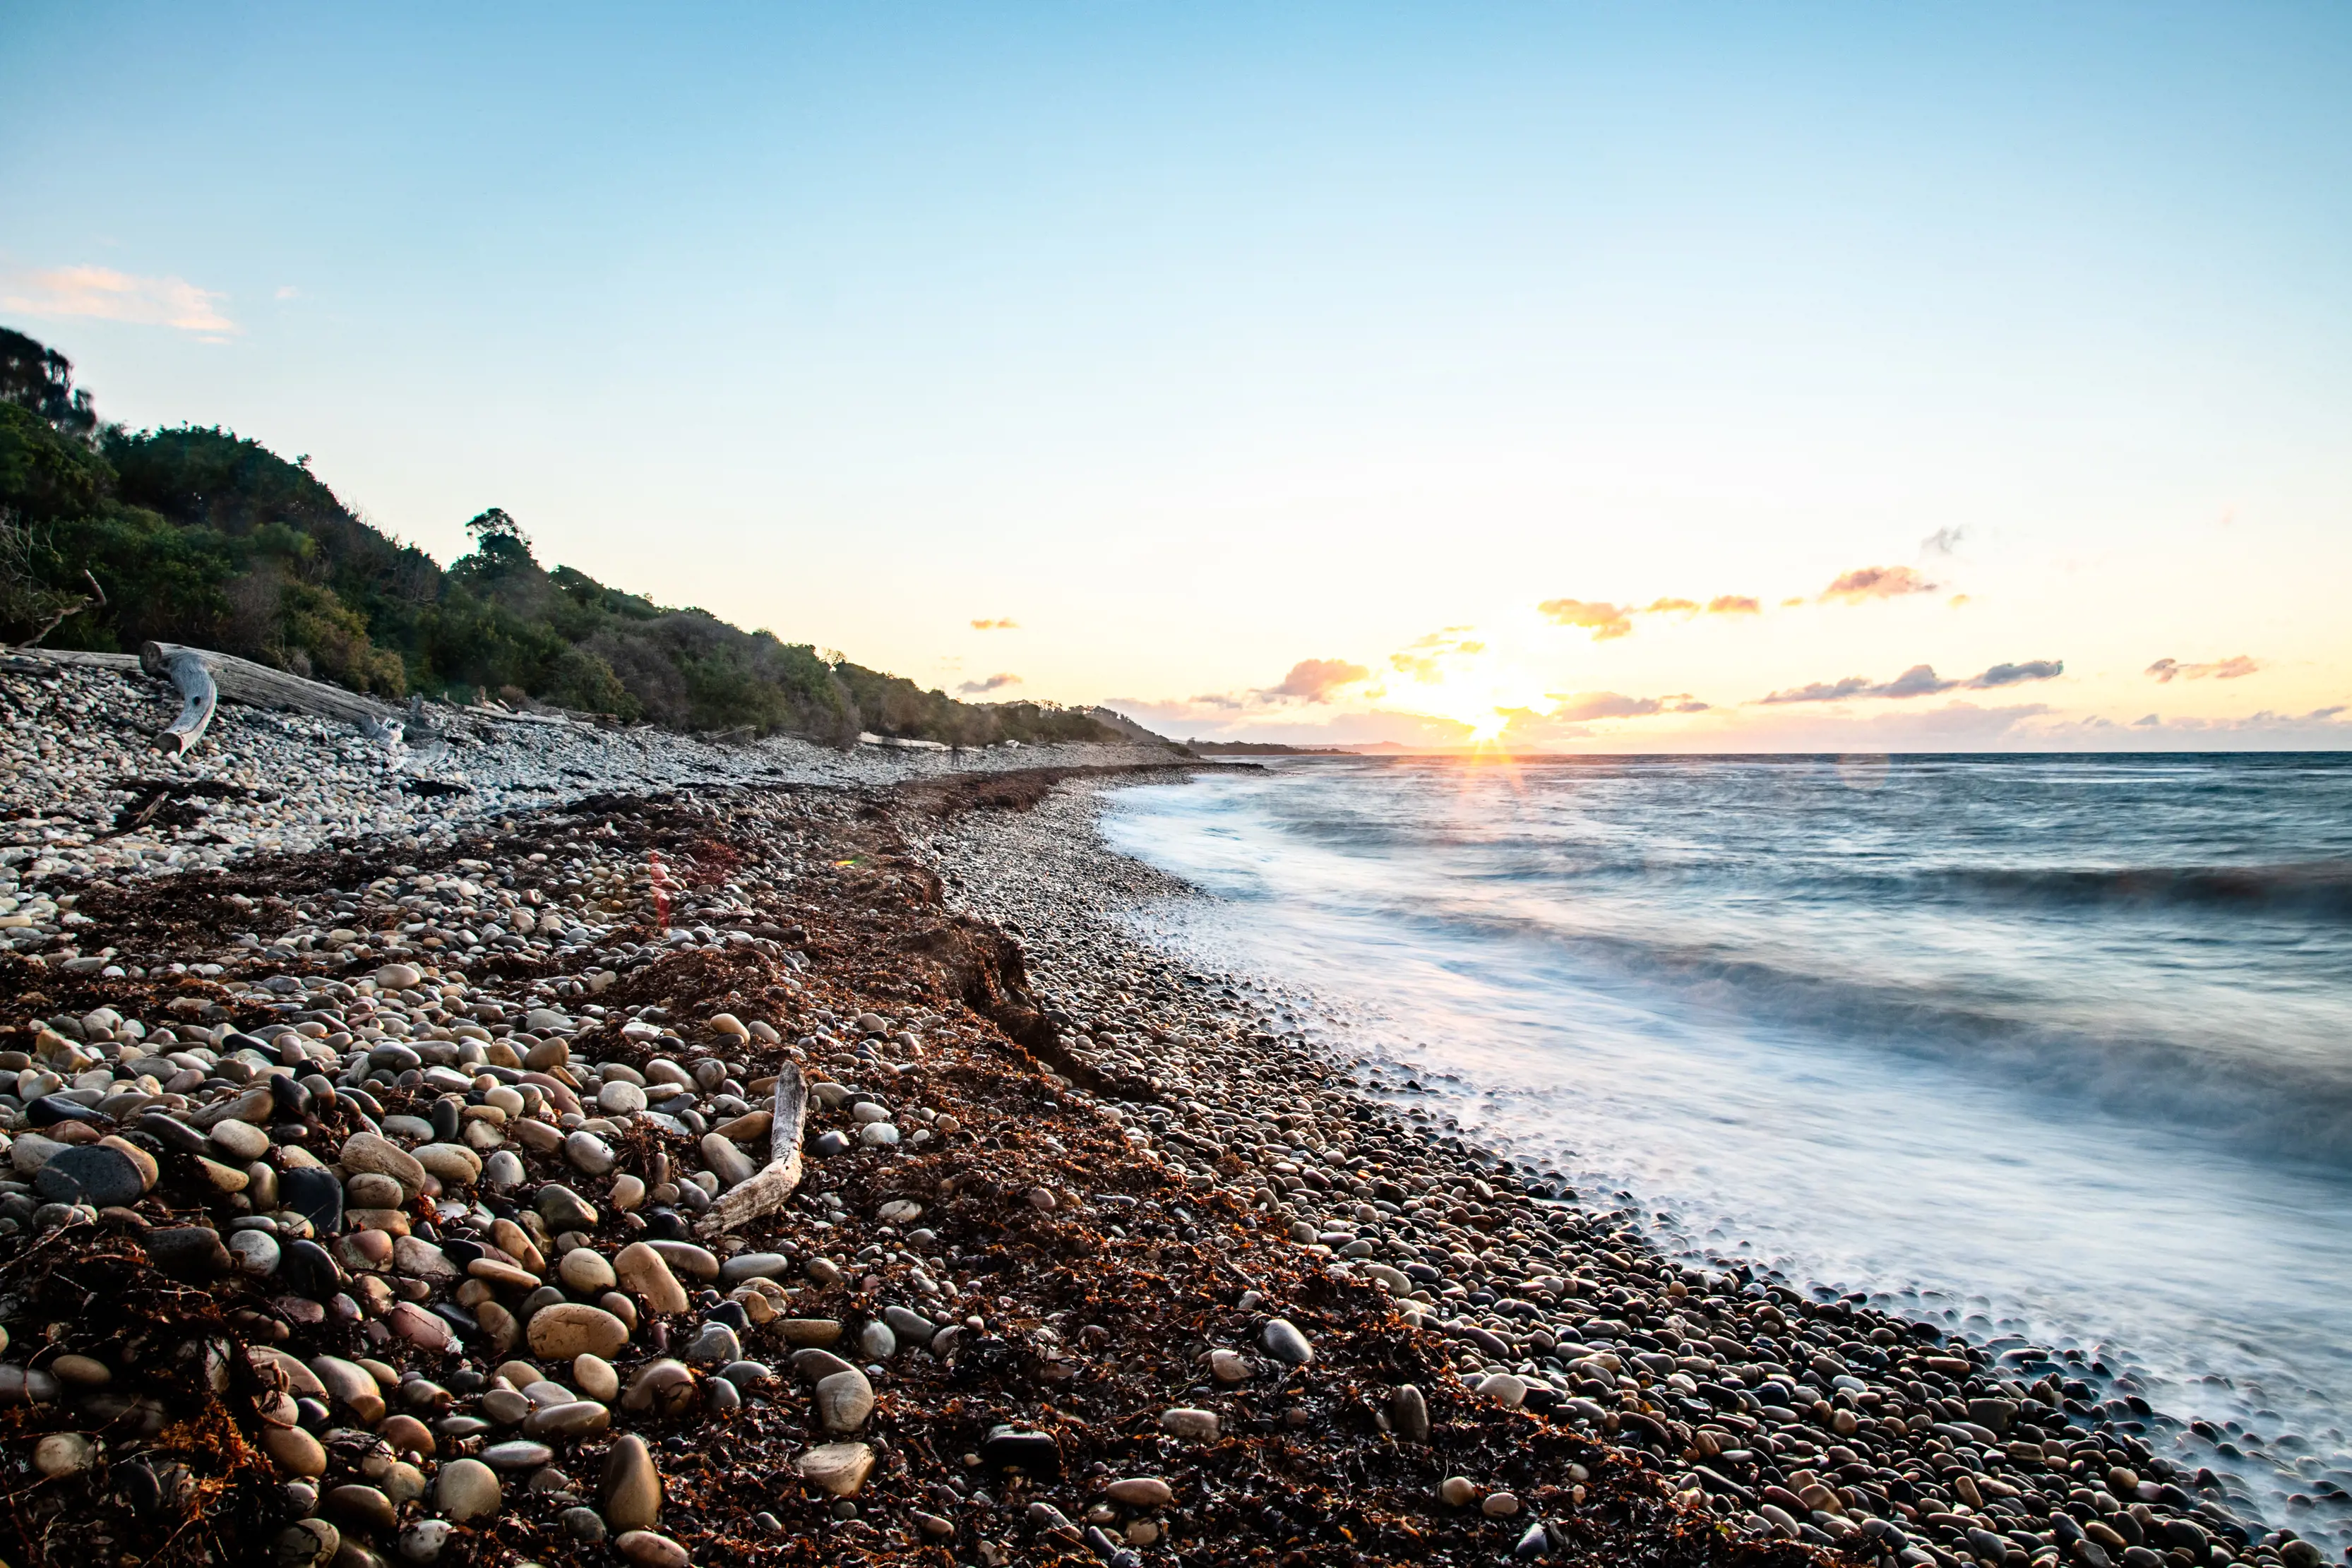 A wide angle Image of the pebbly shore of Lillico Beach, during a spectacular sunrise.